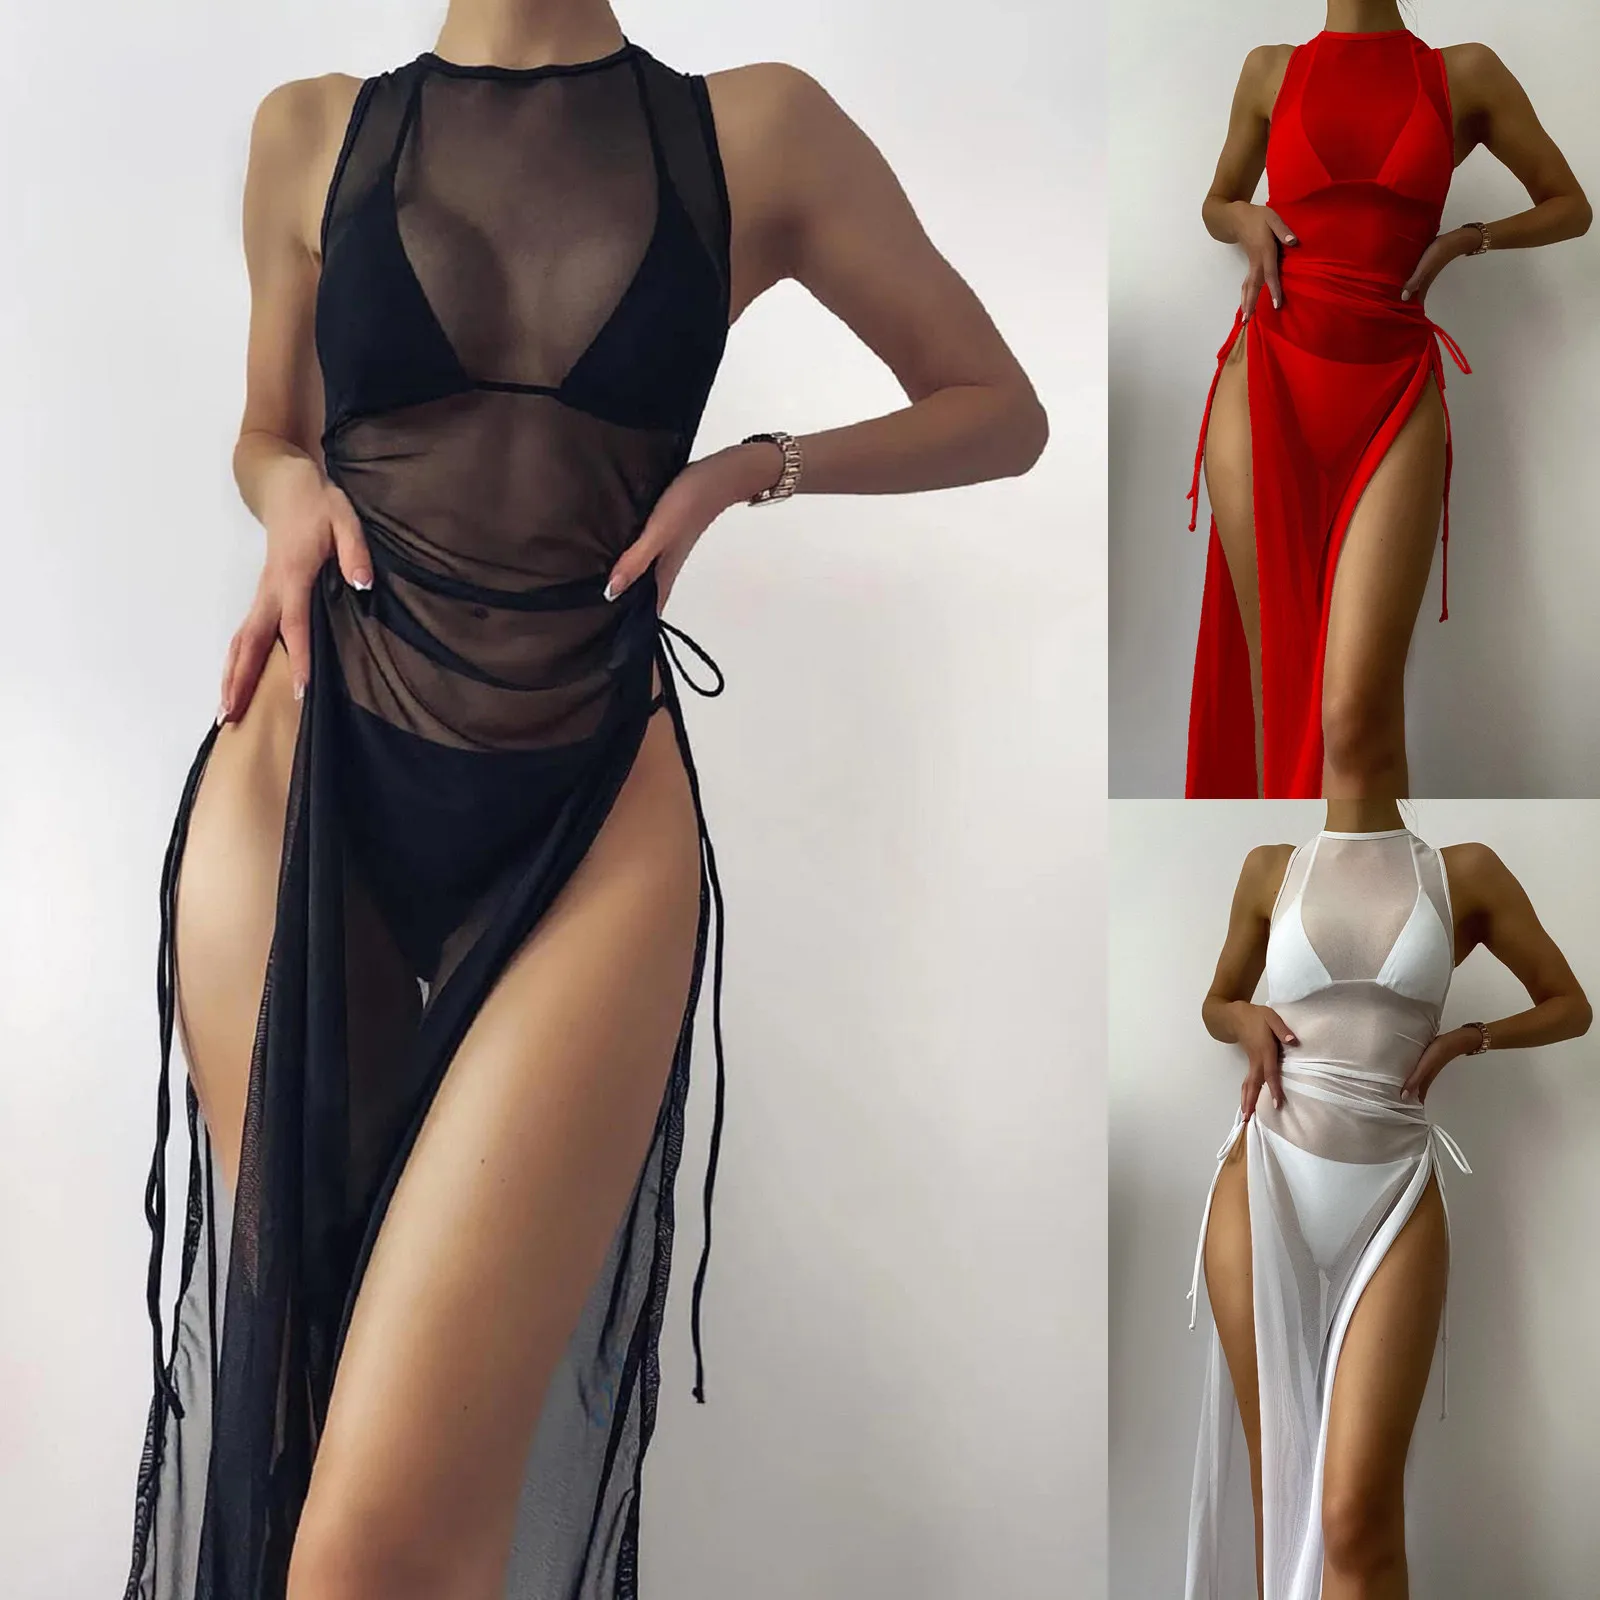 Women Bikini Draped Front Drawstring Knot Mesh Cover Up Without Lingerie  Hight Split Cleavage Cover up V Neck